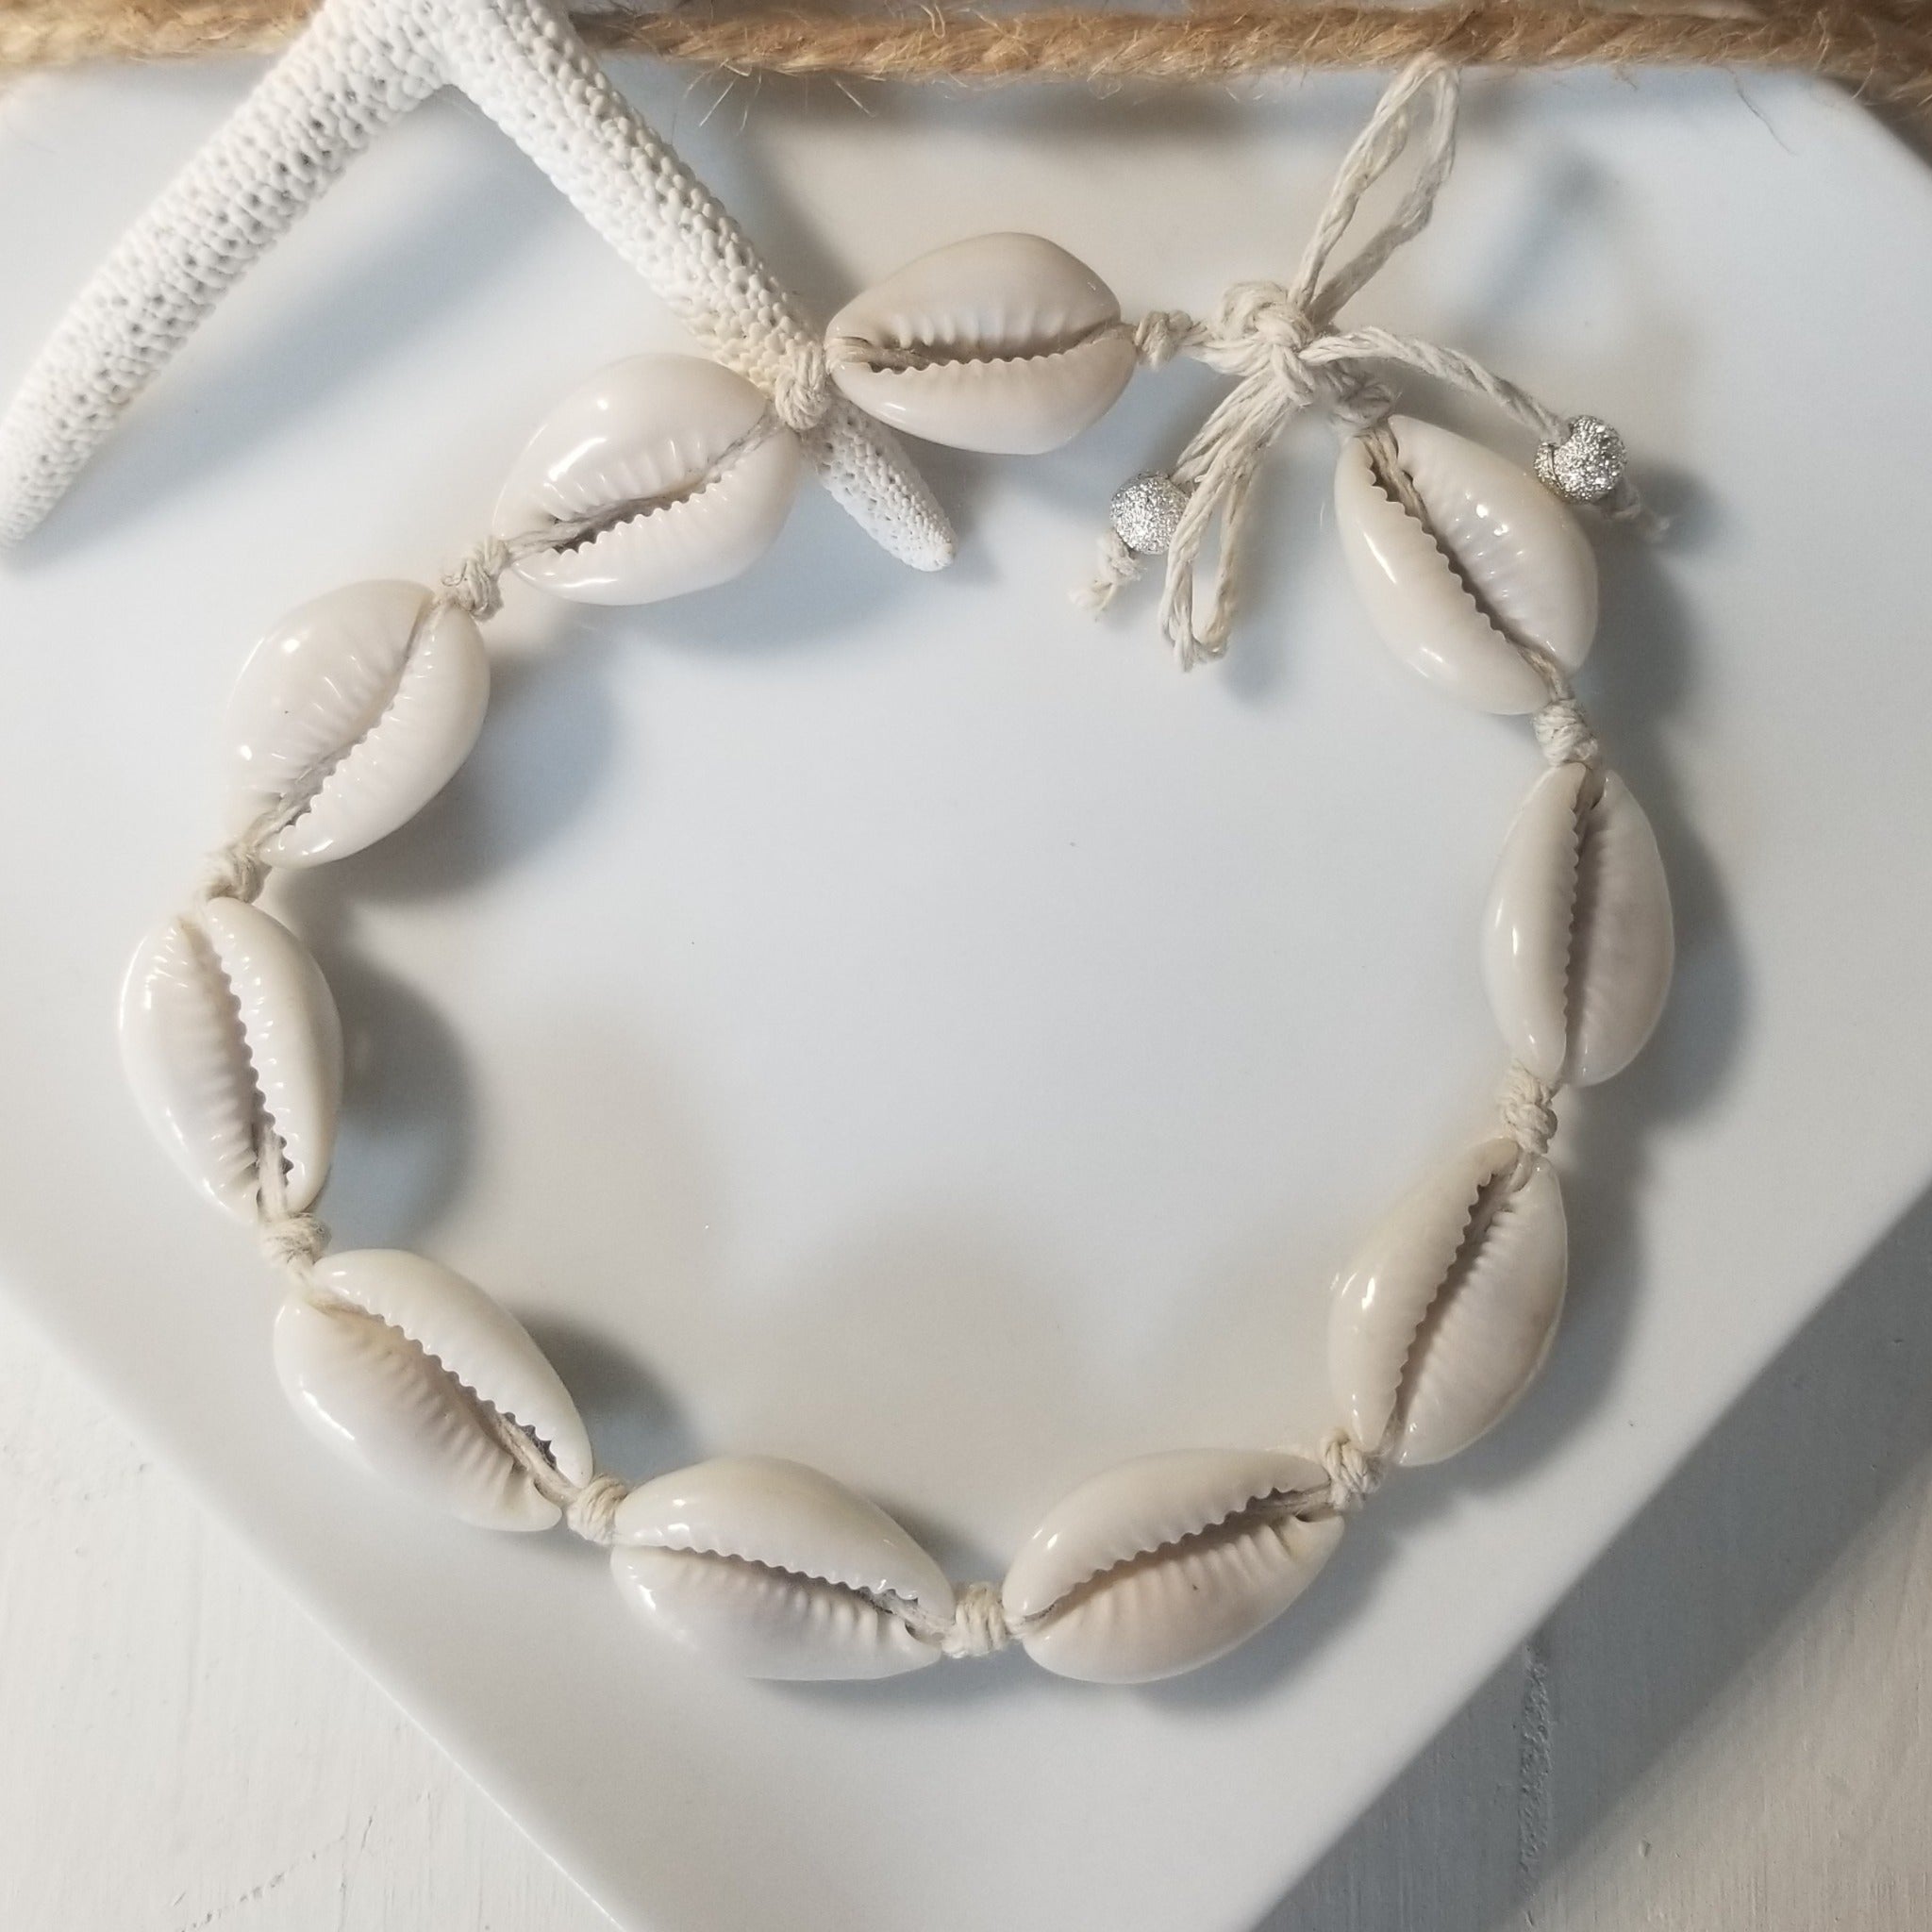 Puka Shell Jewelry - Necklace - Bracelet or Anklet